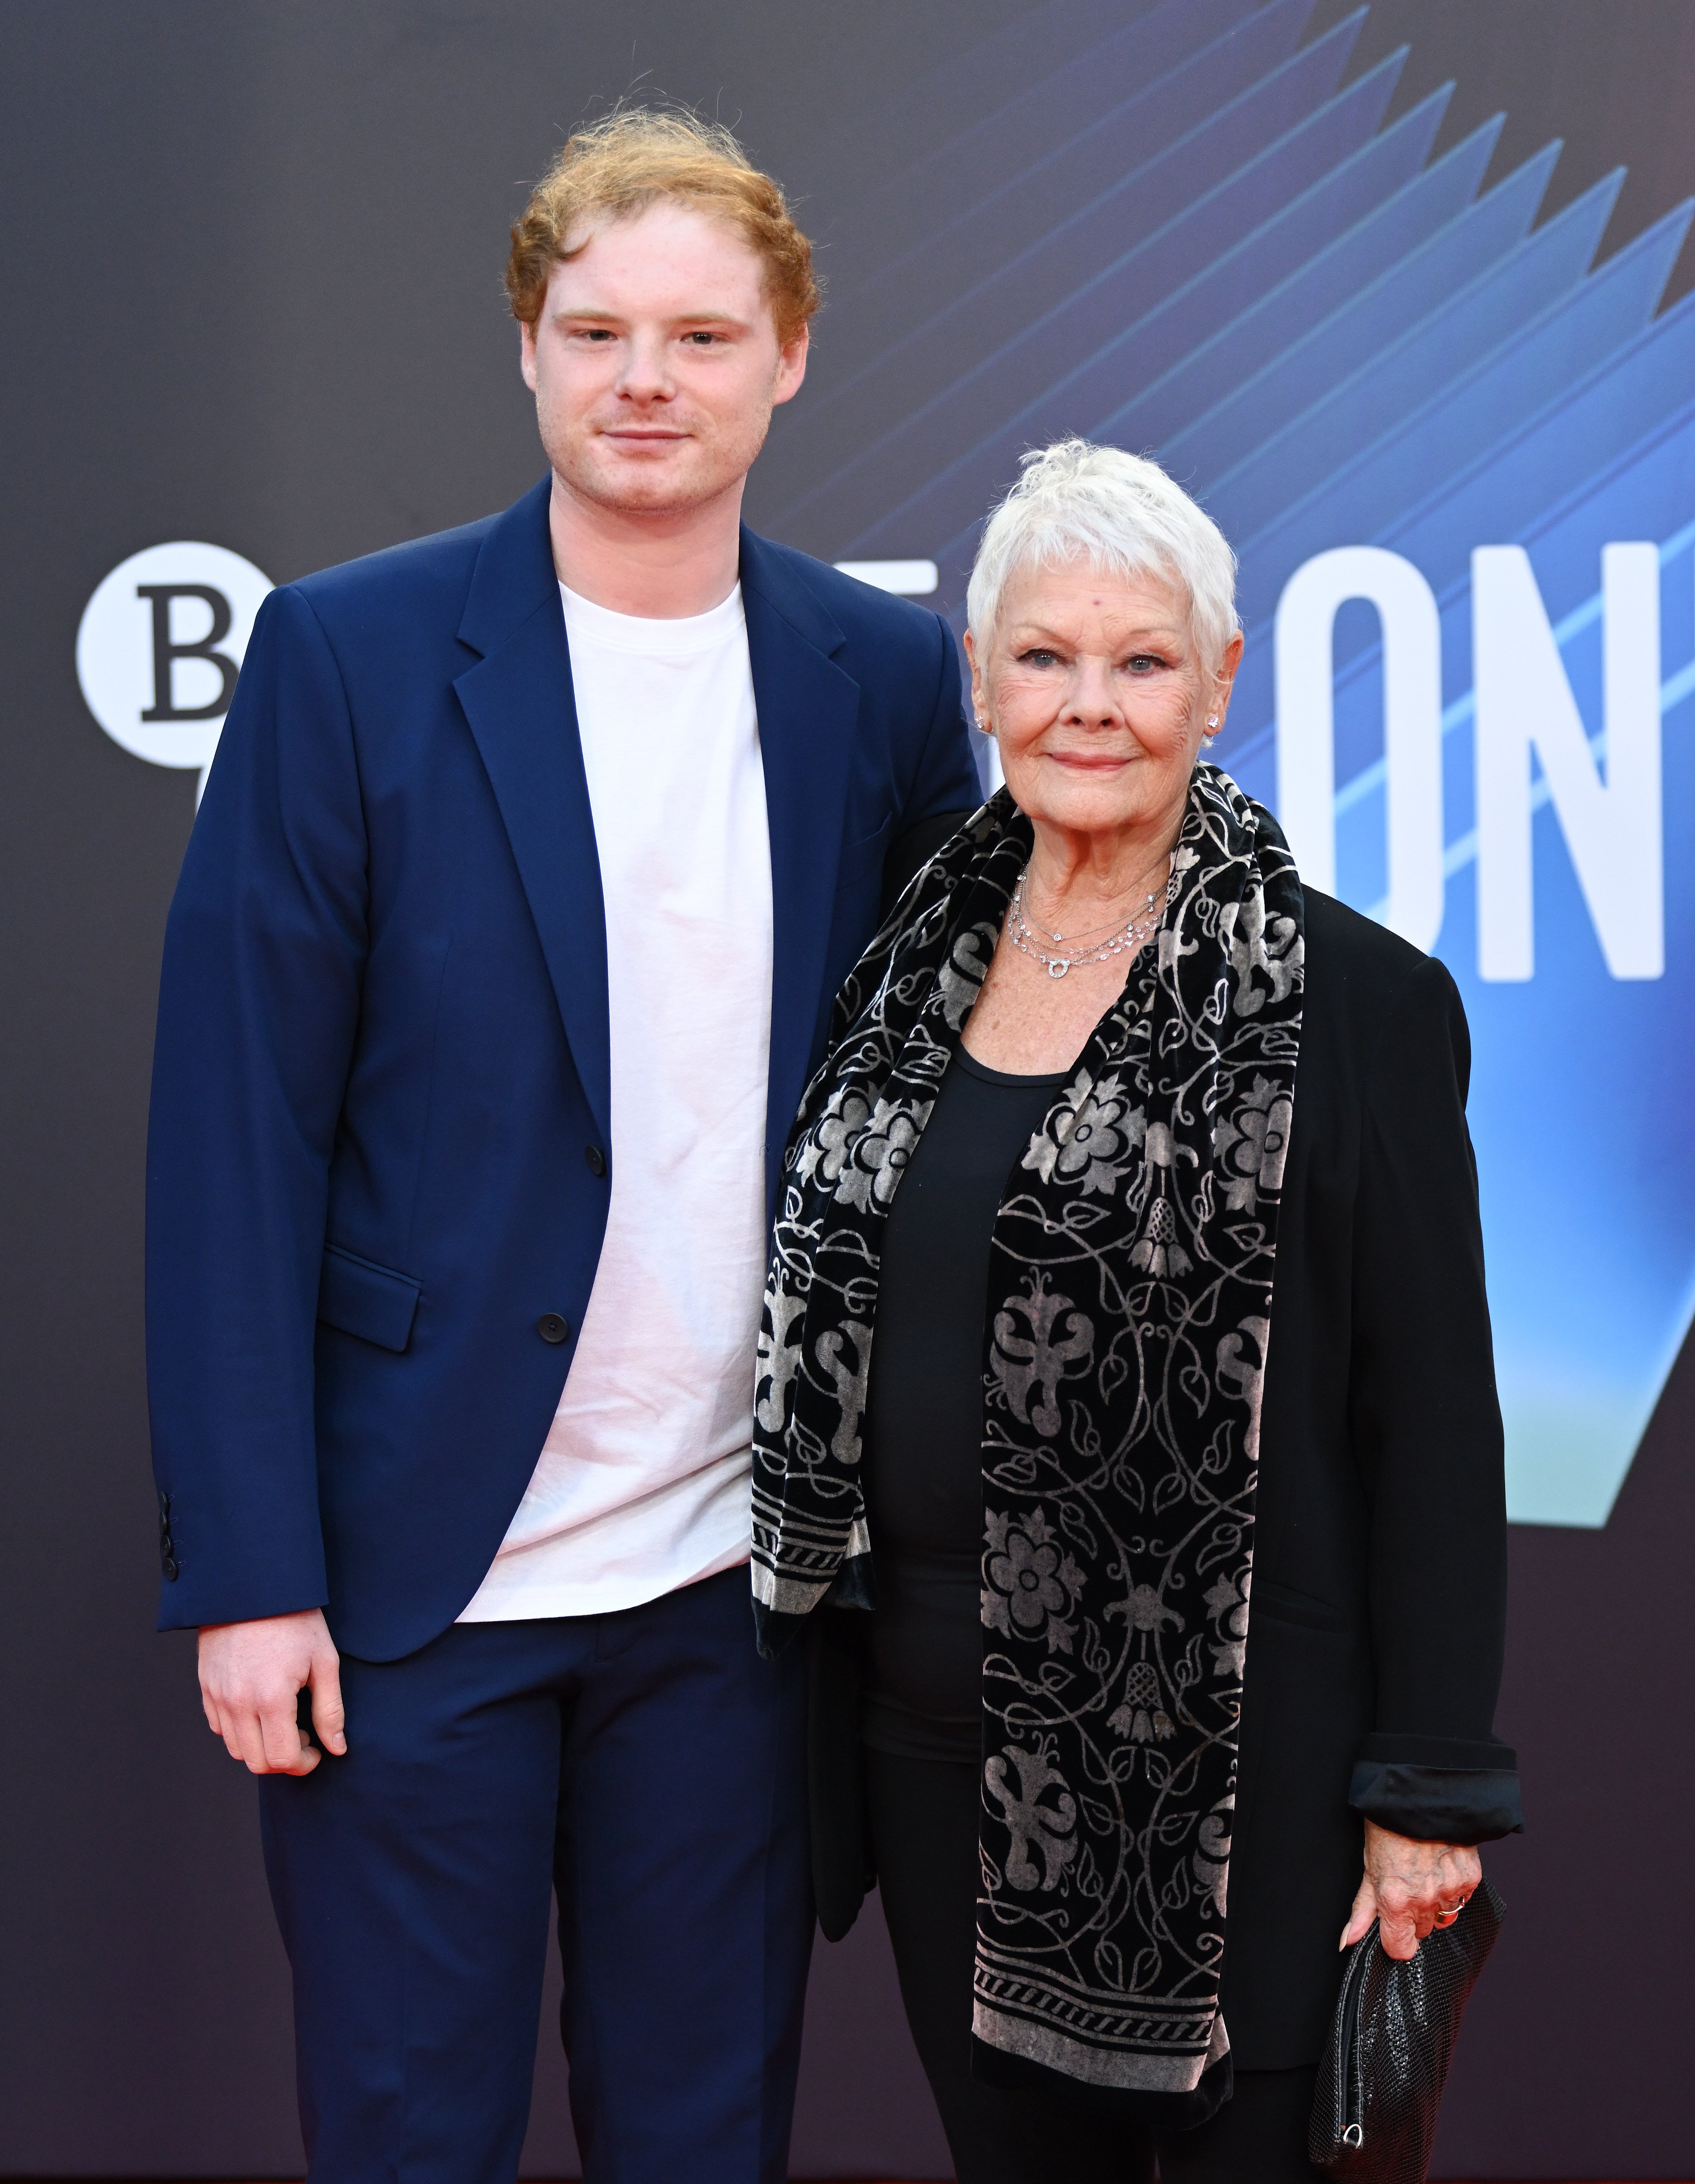 Judi Dench and Sam WIlliams attend the "Belfast" European Premiere during the 65th BFI London Film Festival at The Royal Festival Hall on October 12, 2021 in London, England ┃Source: Getty Images